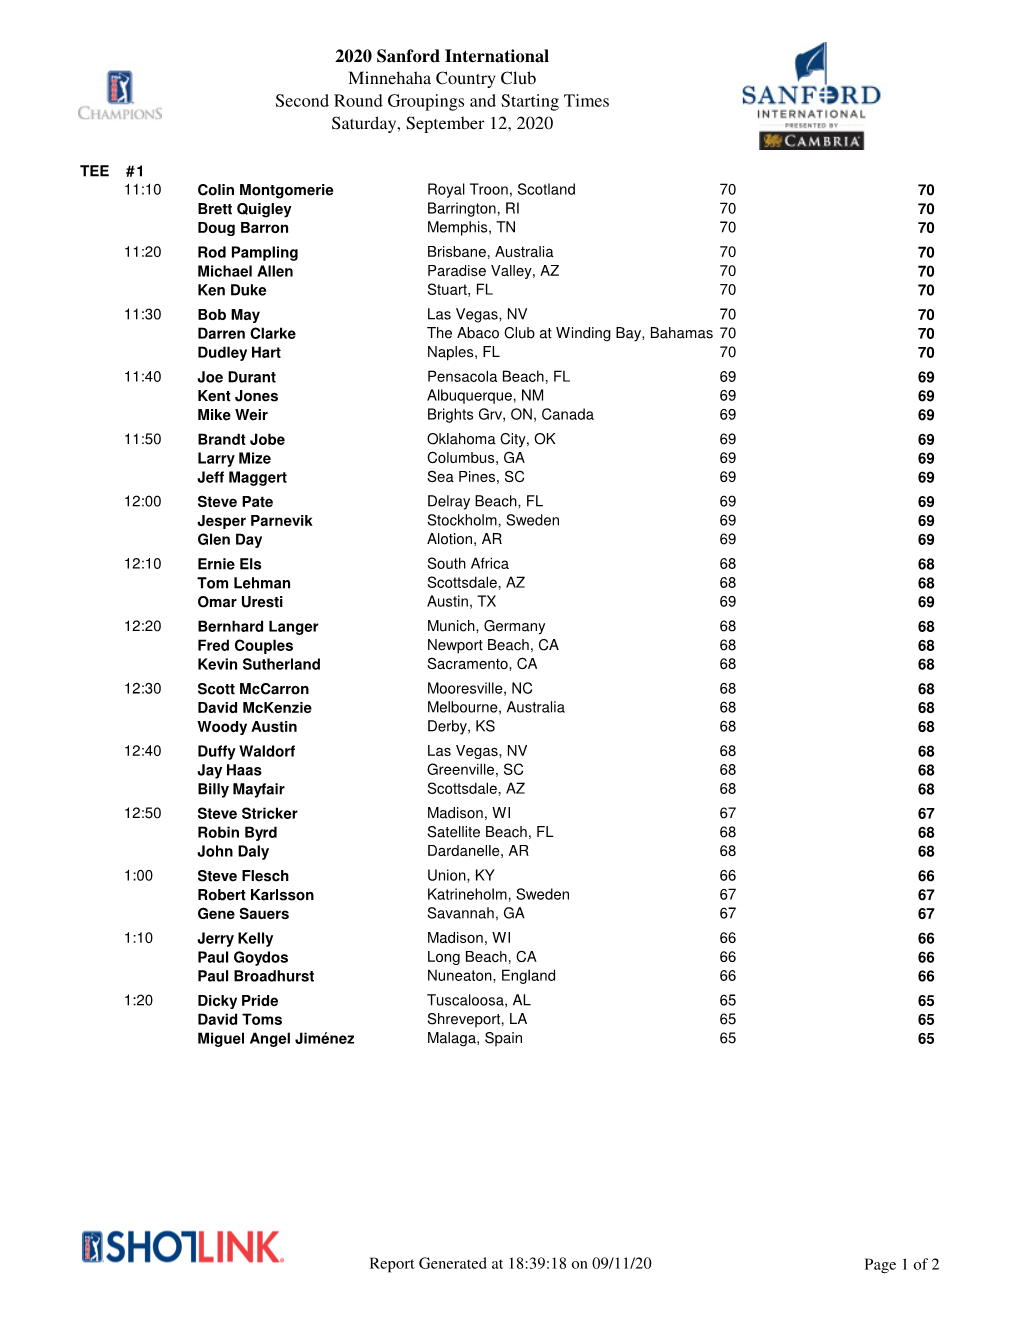 2020 Sanford International Minnehaha Country Club Second Round Groupings and Starting Times Saturday, September 12, 2020